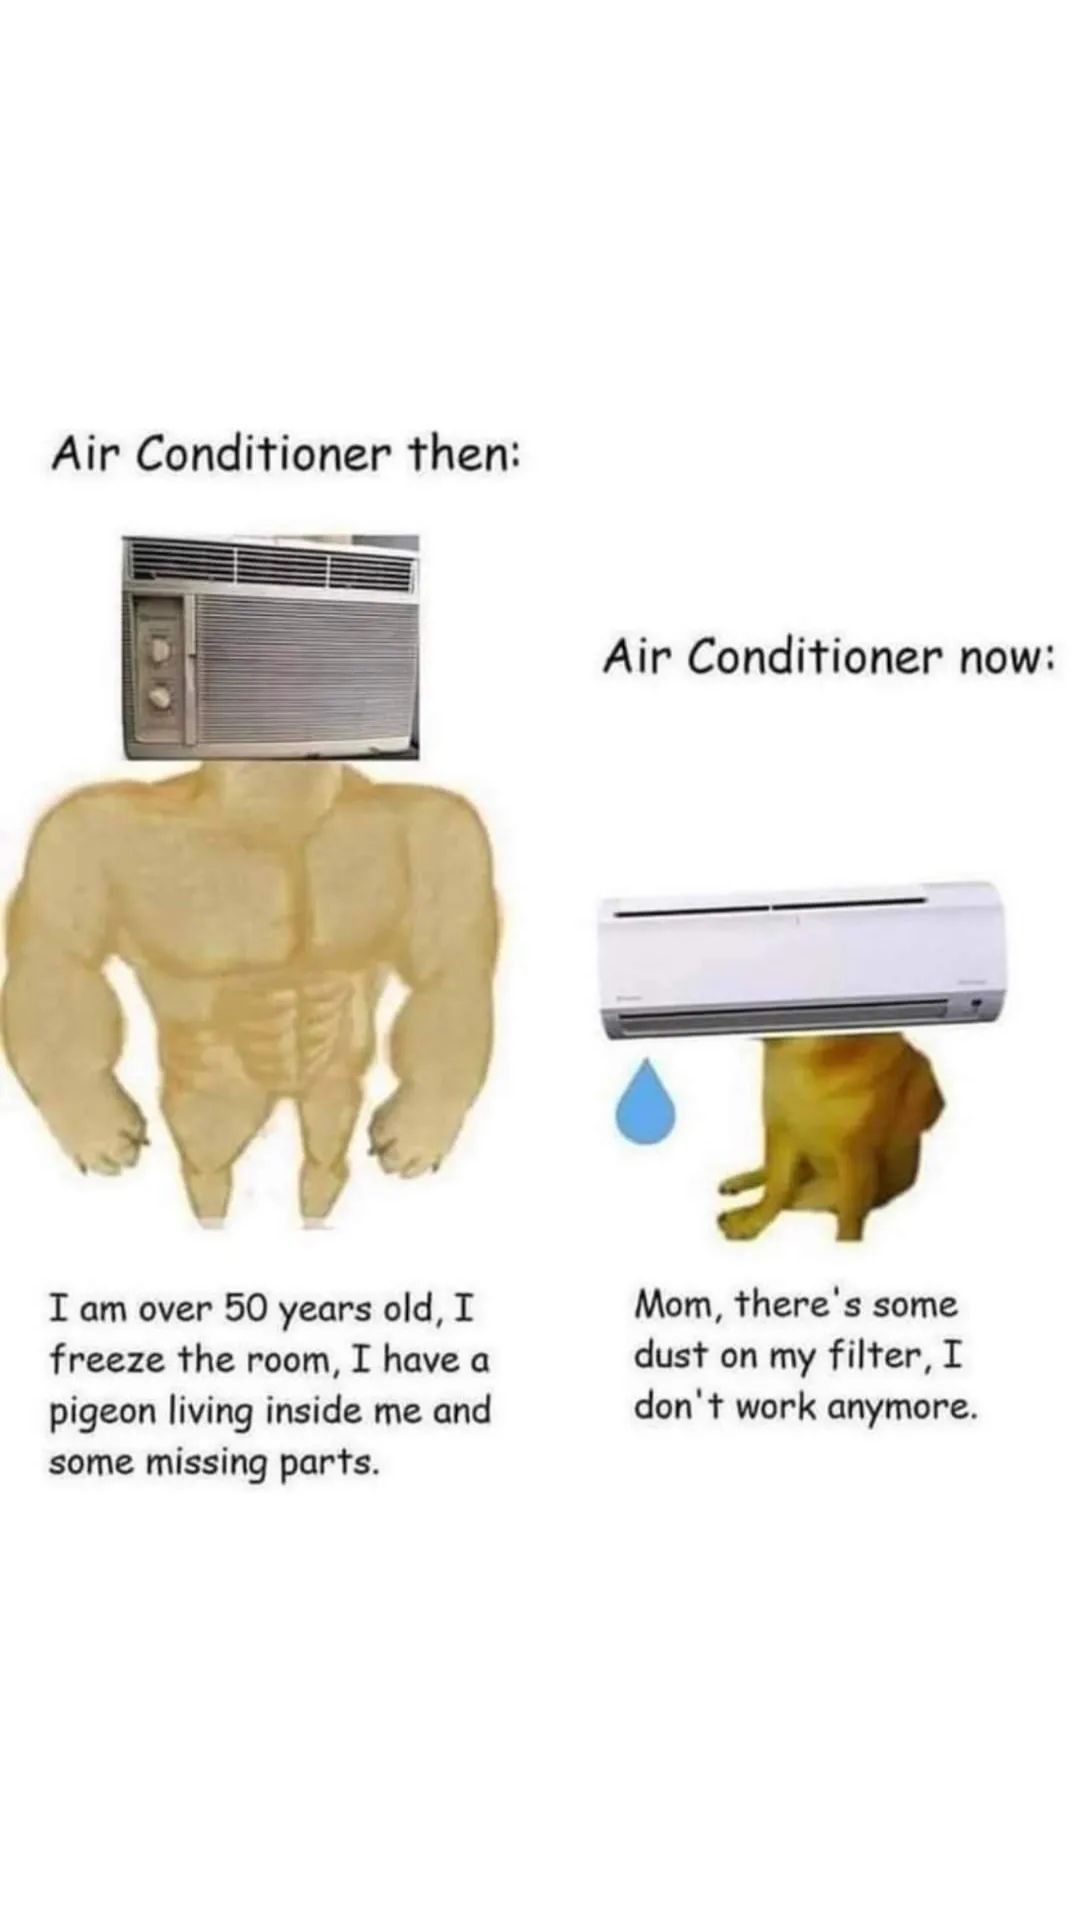 air_conditioners_then_and_now.jpg